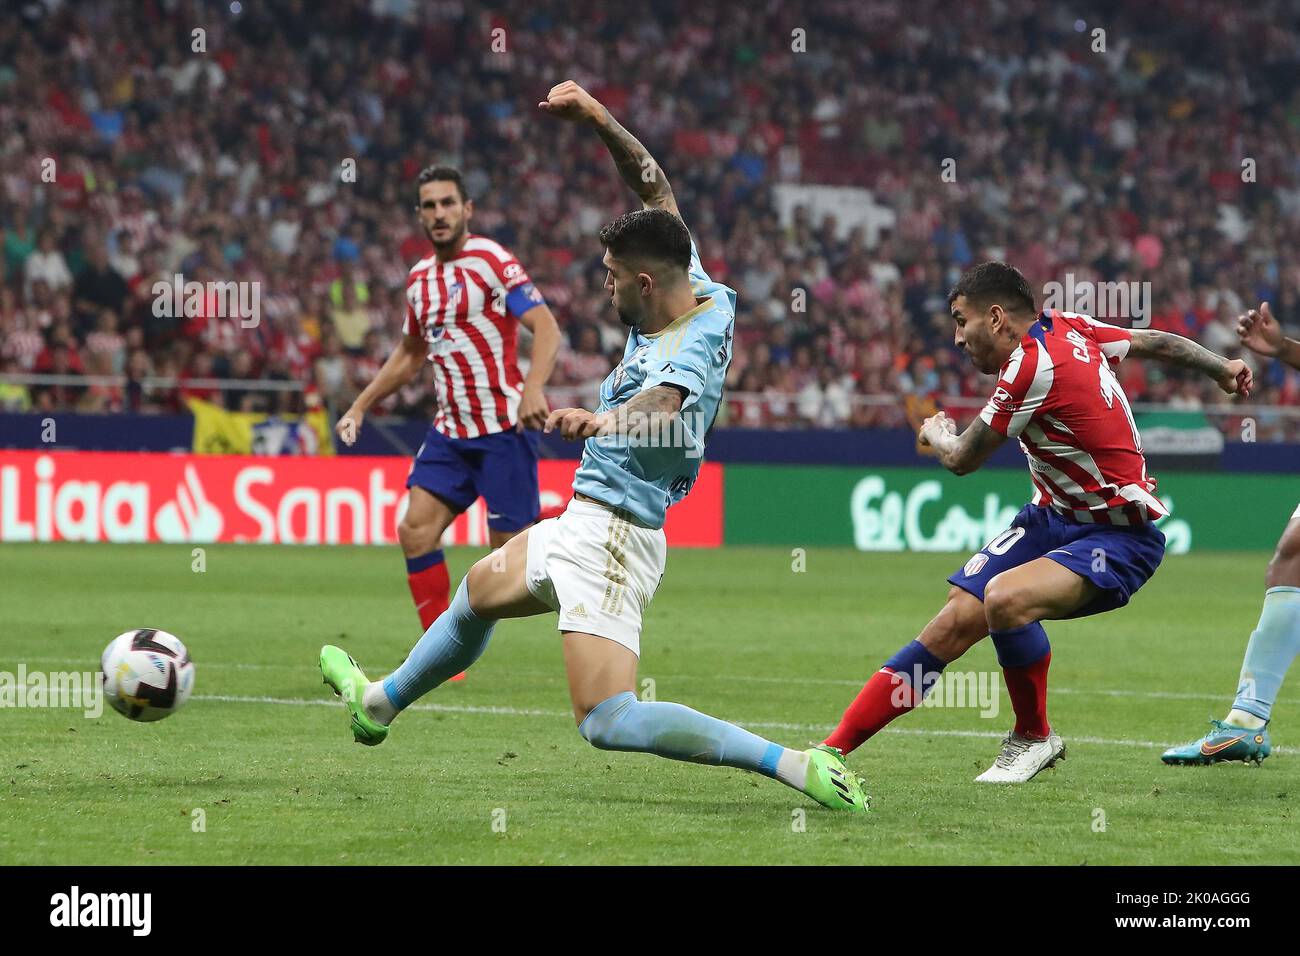 Madrid, Spain. 10th Sep, 2022. Atletico´s Correa in action during La Liga match day 5 between Atletico de Madrid and Celta at Civitas Metropolitano Stadium in Madrid, Spain, on September 10, 2022. Credit: Edward F. Peters/Alamy Live News Stock Photo